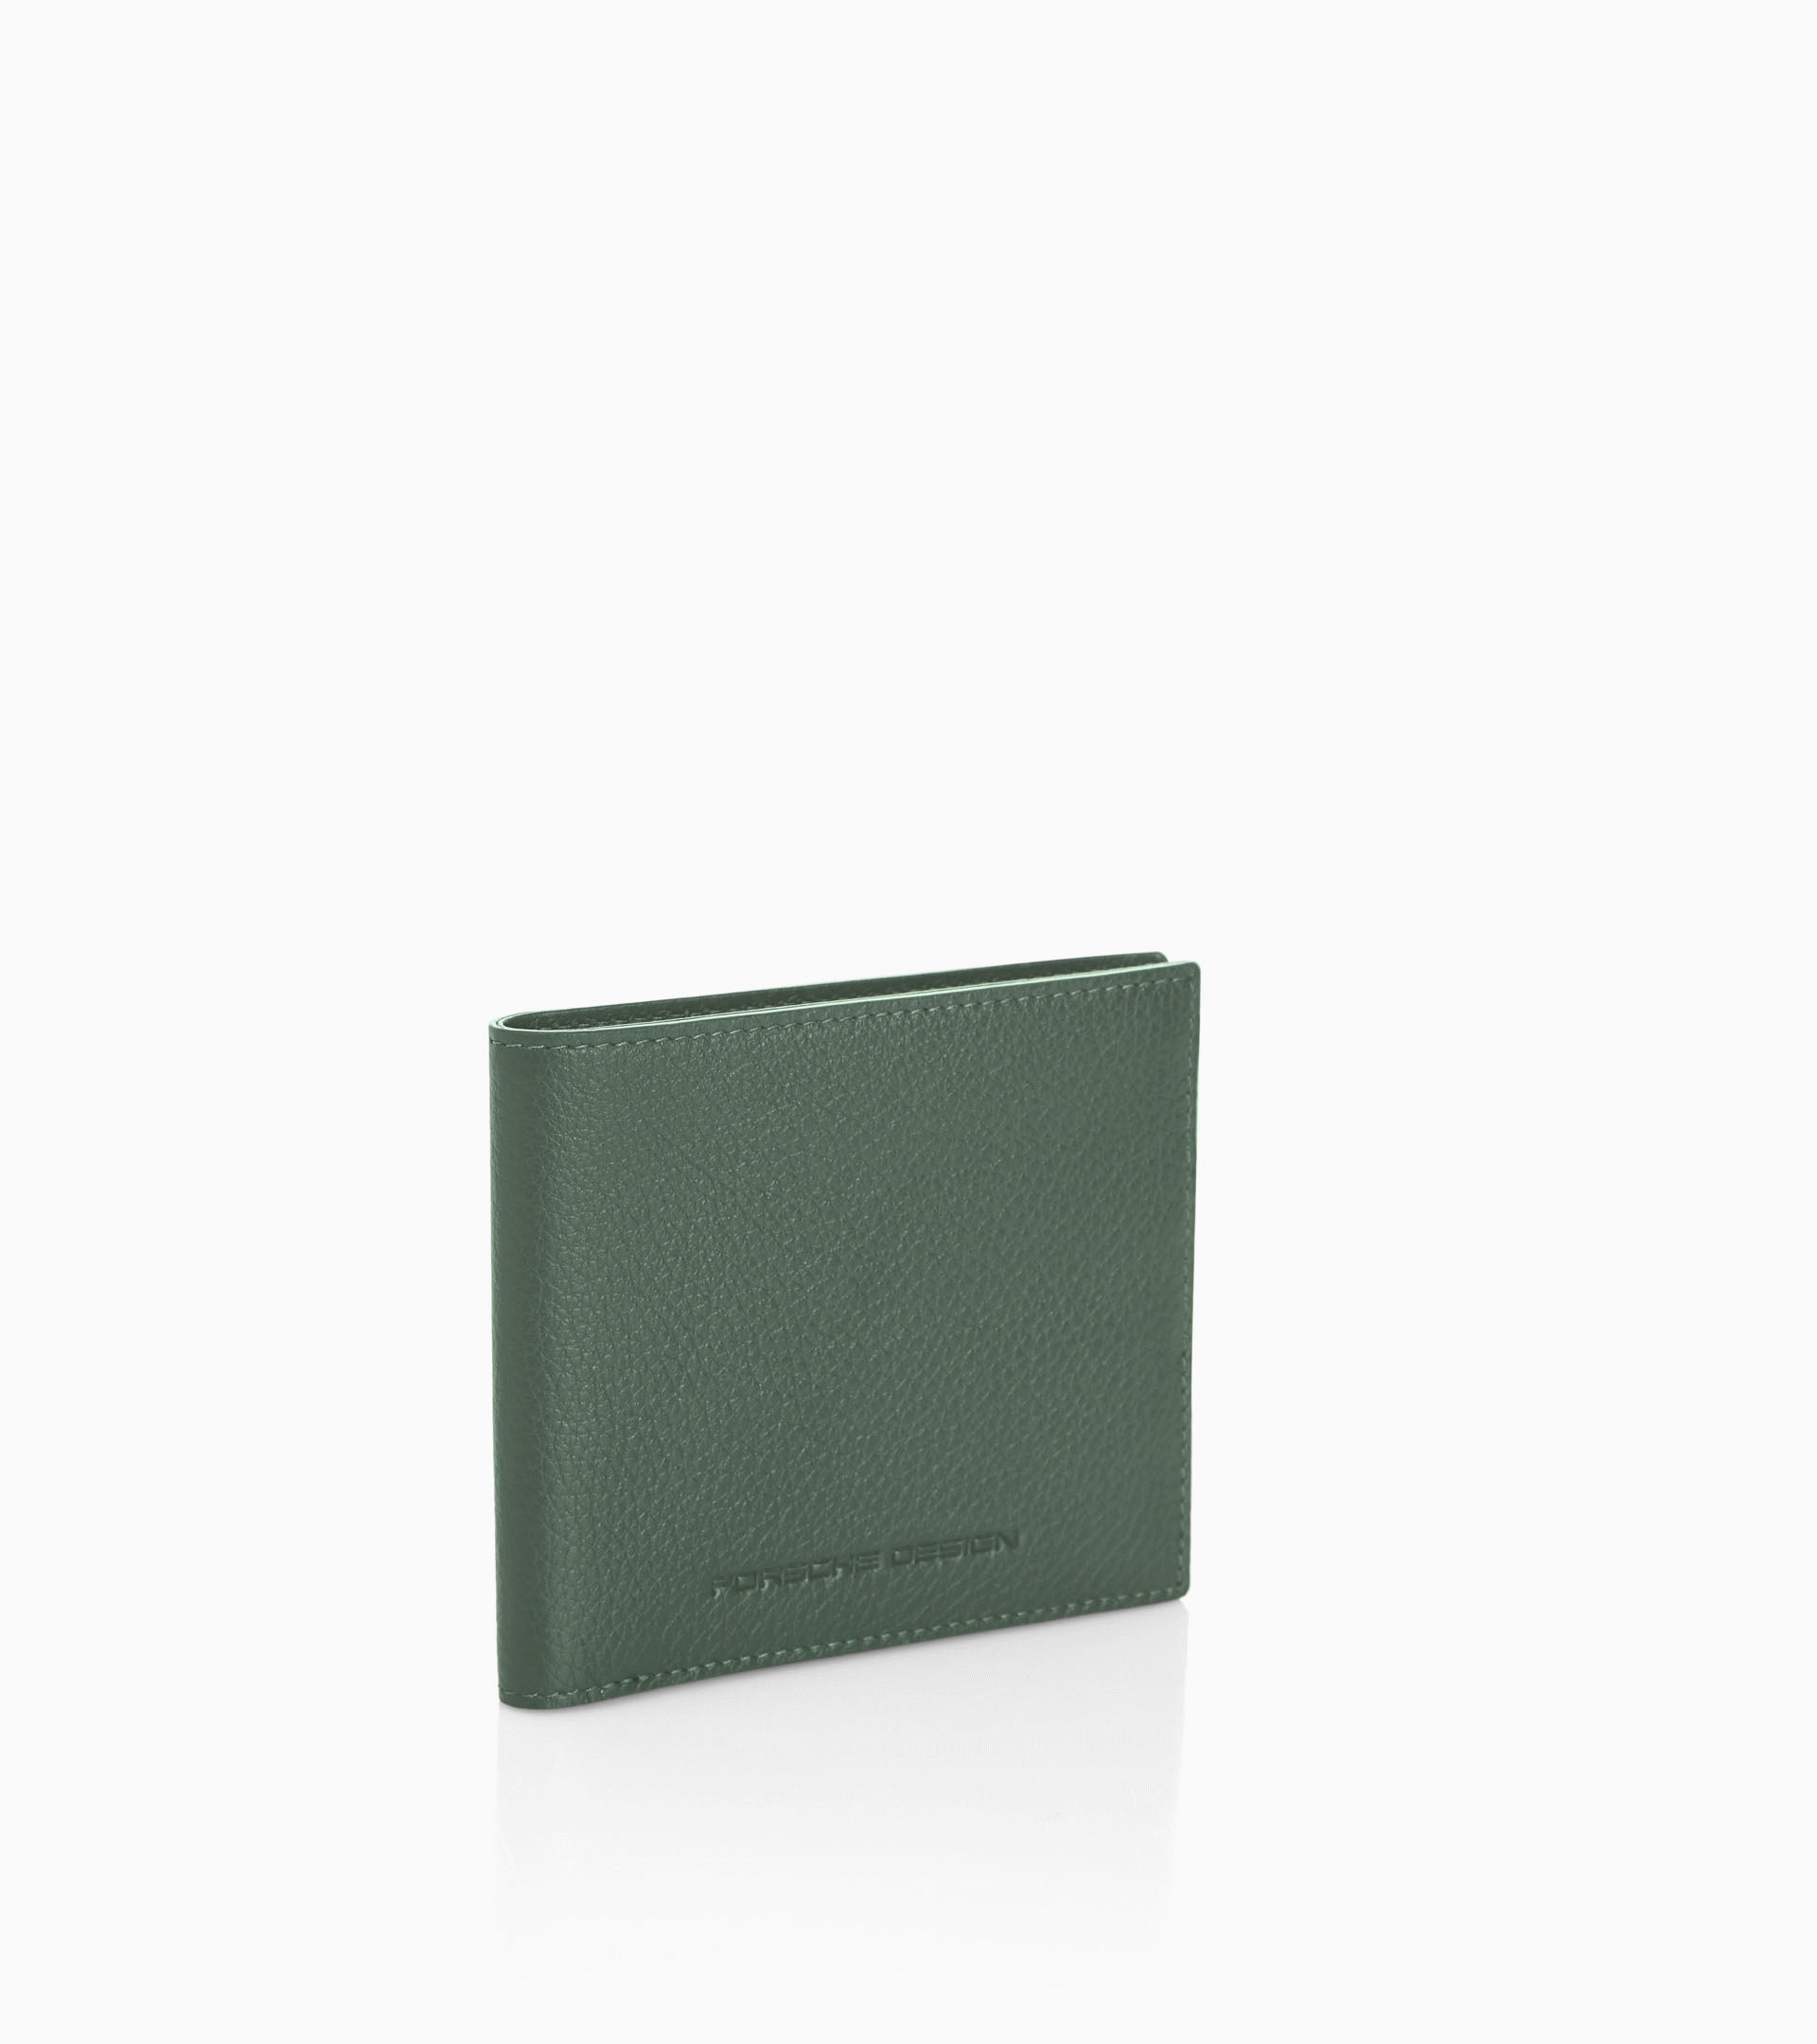 Burberry Card Holder for Women Green Leather and Great Condition